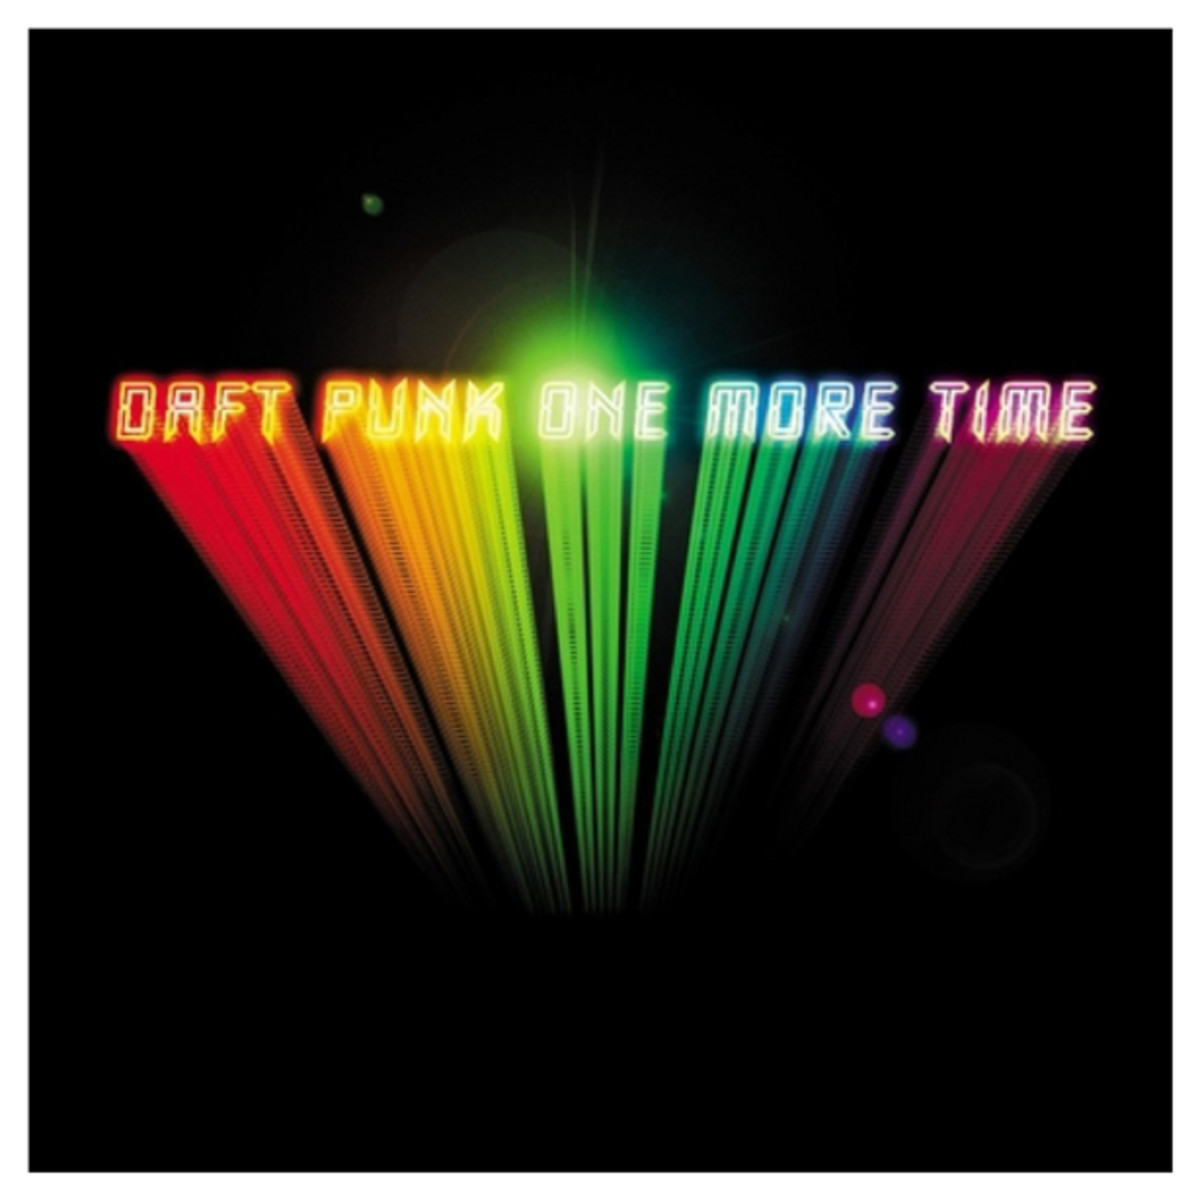 Watch How Daft Punk 'Could' Have Flipped The Sample On "One More Time" - EDM News